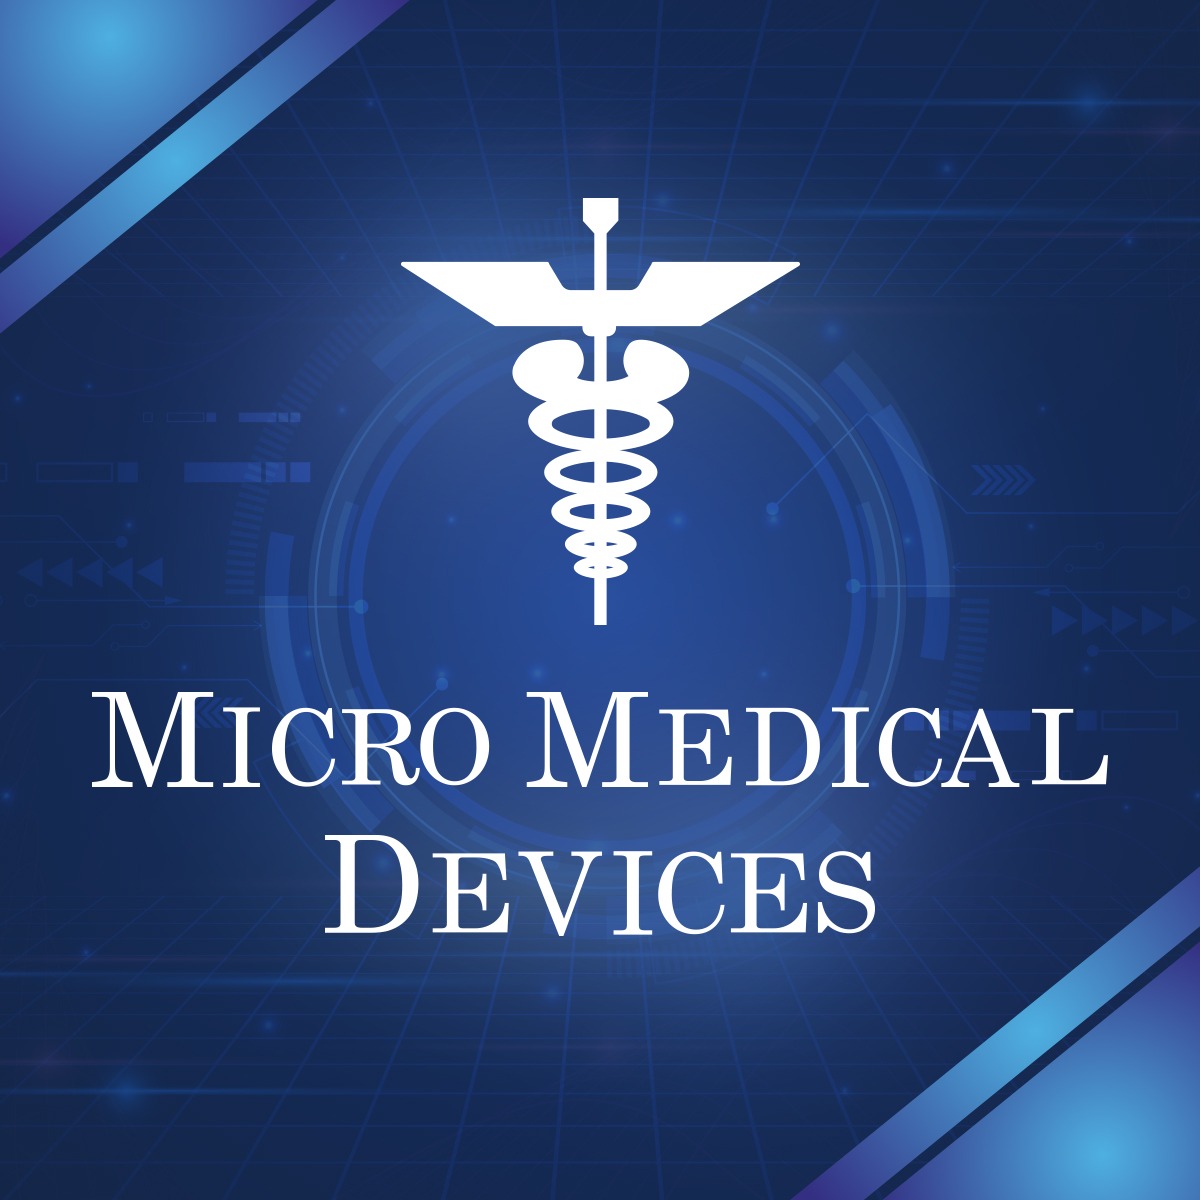 Micro Medical Devices